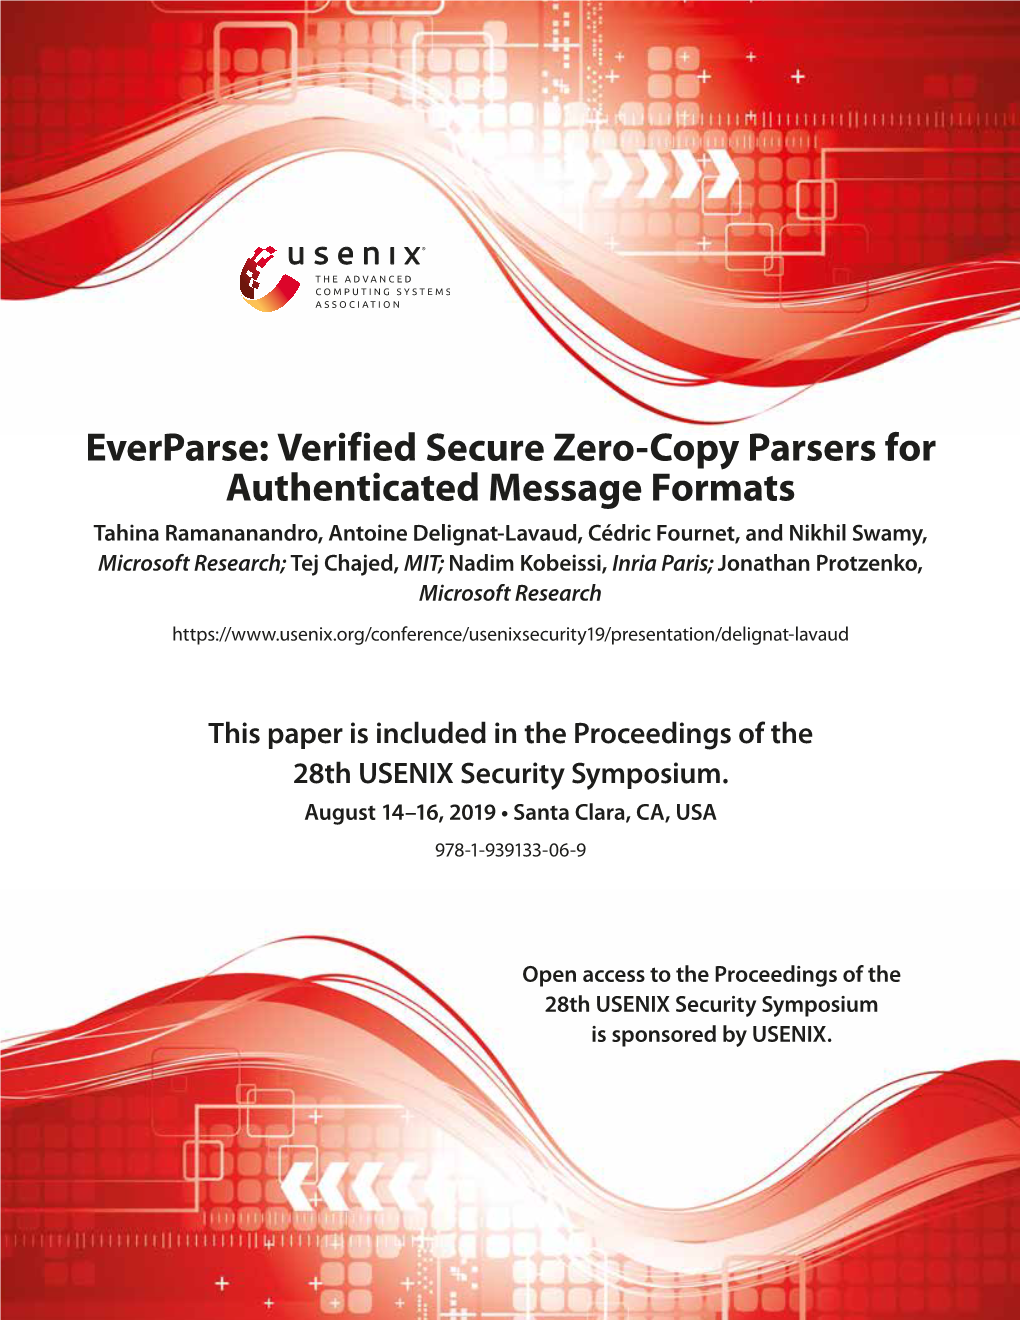 Verified Secure Zero-Copy Parsers for Authenticated Message Formats